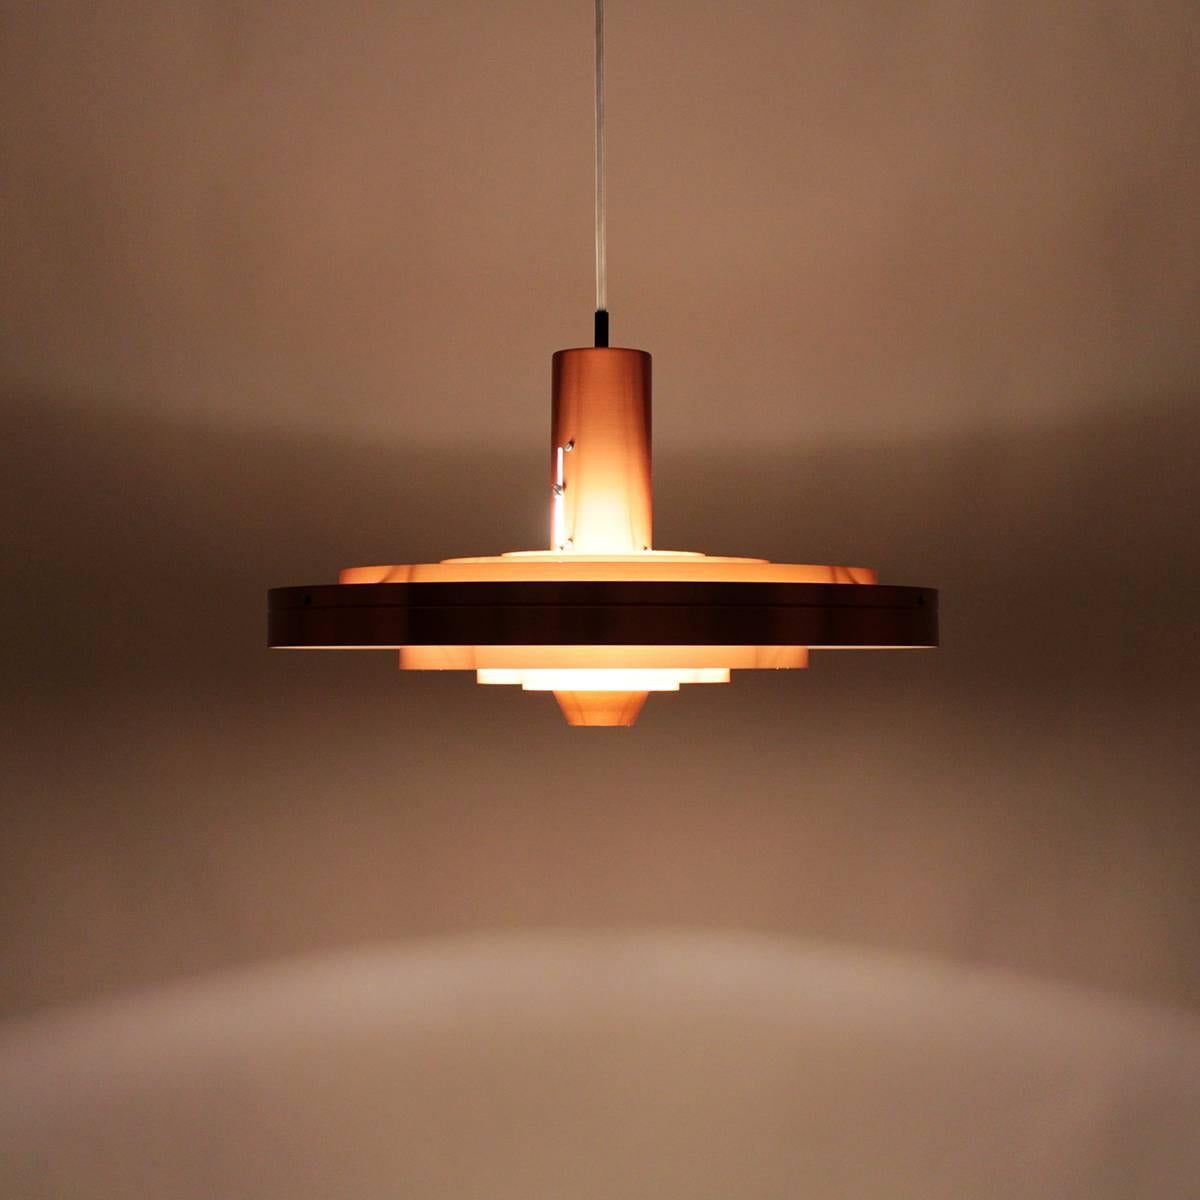 Fibonacci- copper pendant designed by Sophus Frandsen and produced for Fog & Mørup in 1963 - Attractive copper hanging lamp in very good (near excellent) vintage condition!

Rare and internationally sought after piece - absolutely stunning